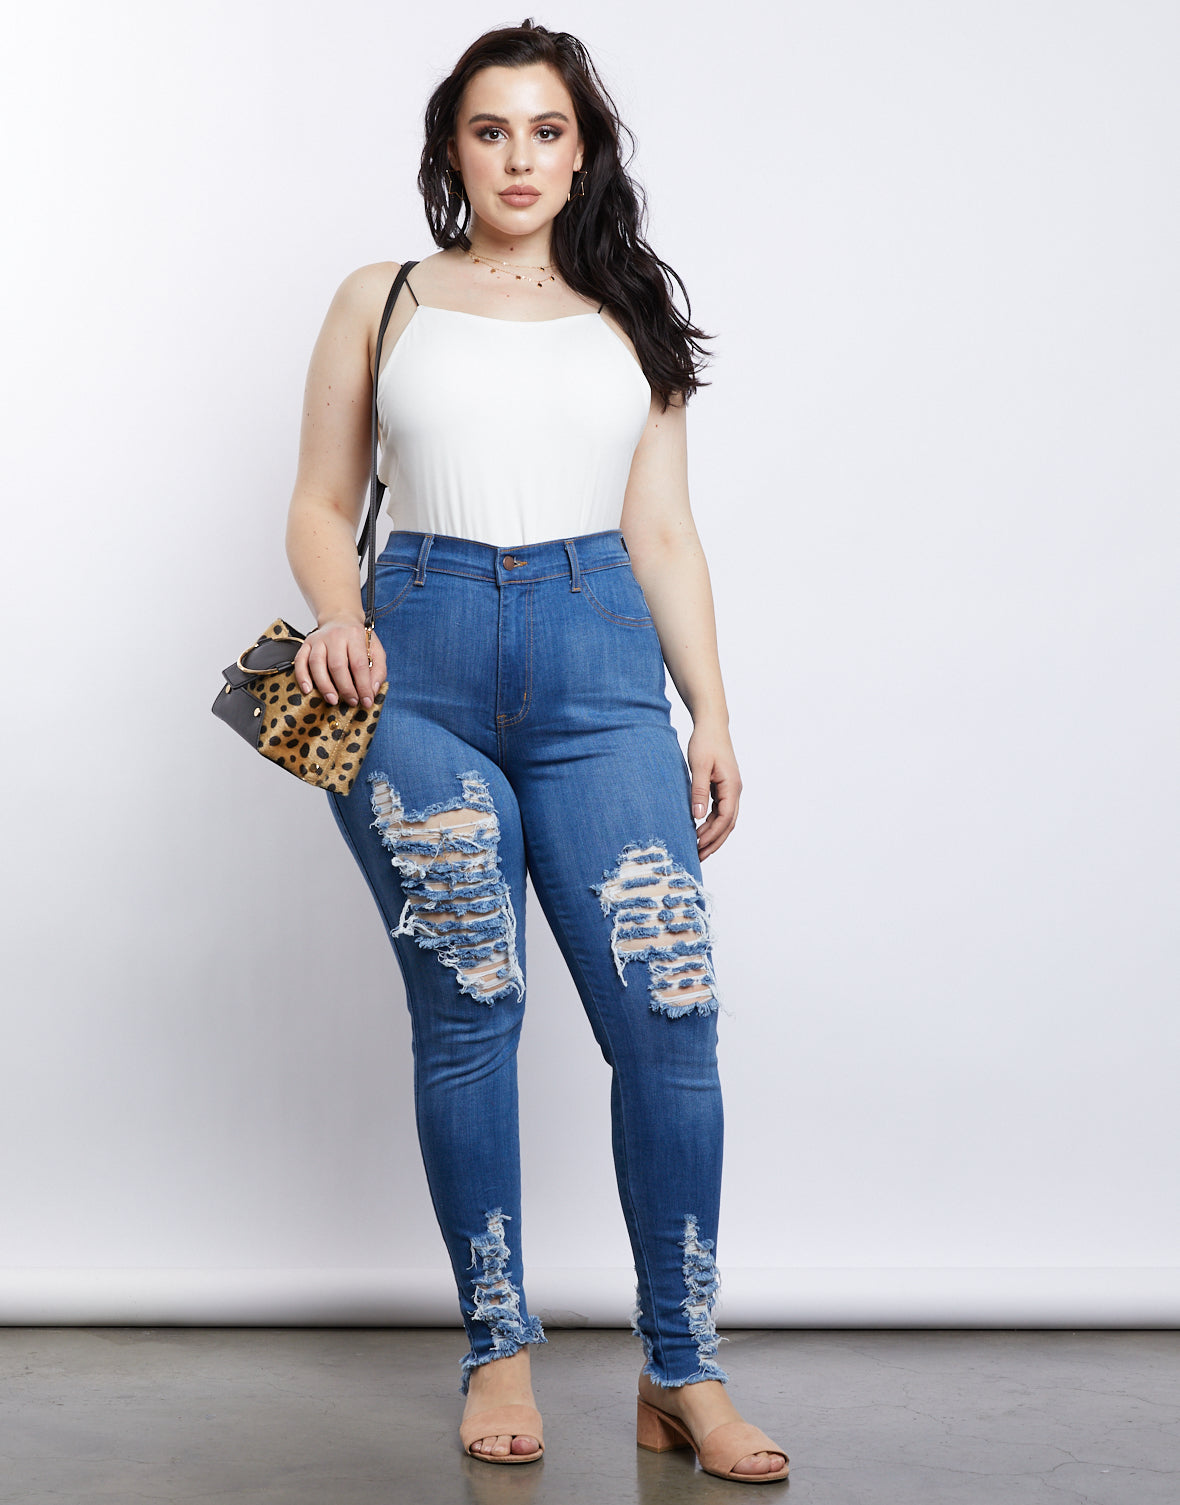 Plus Size Ripped Blue Jeans - Best Plus Size Jeans - Distressed Jeans ...